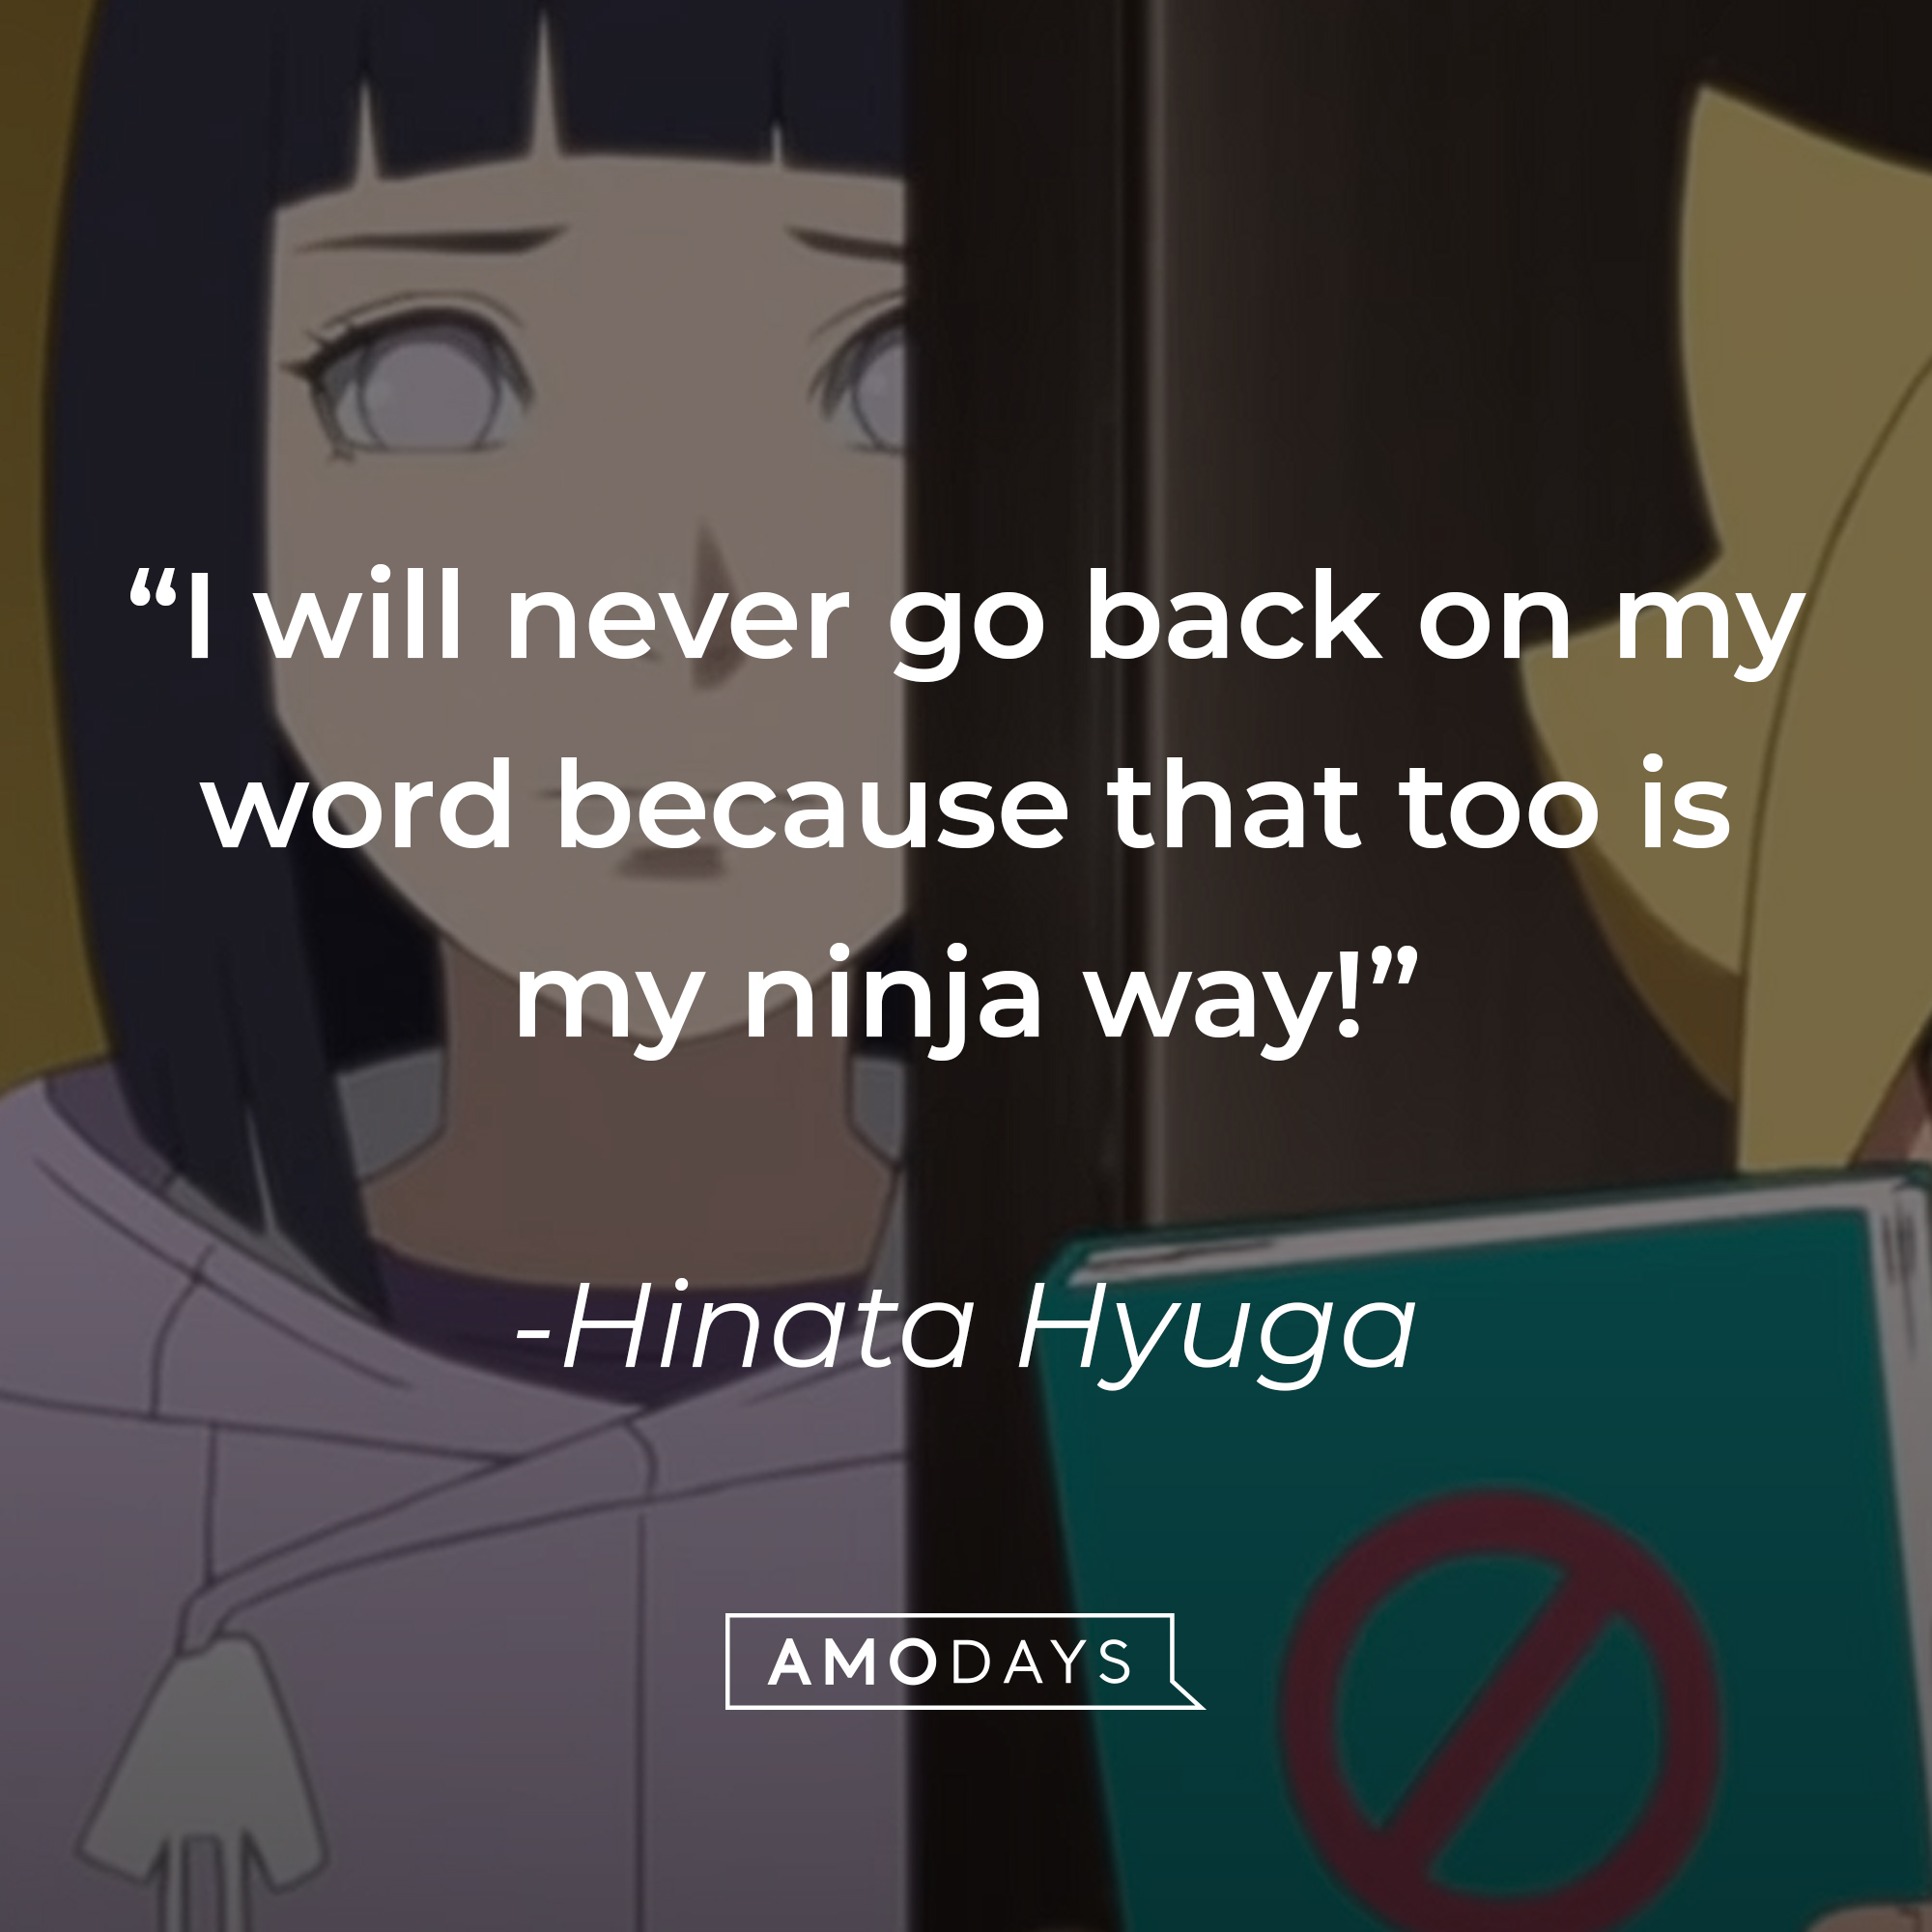 Hinata Hyuga with her quote: “I will never go back on my word because that too is my ninja way!” | Source: youtube.com/CrunchyrollCollection